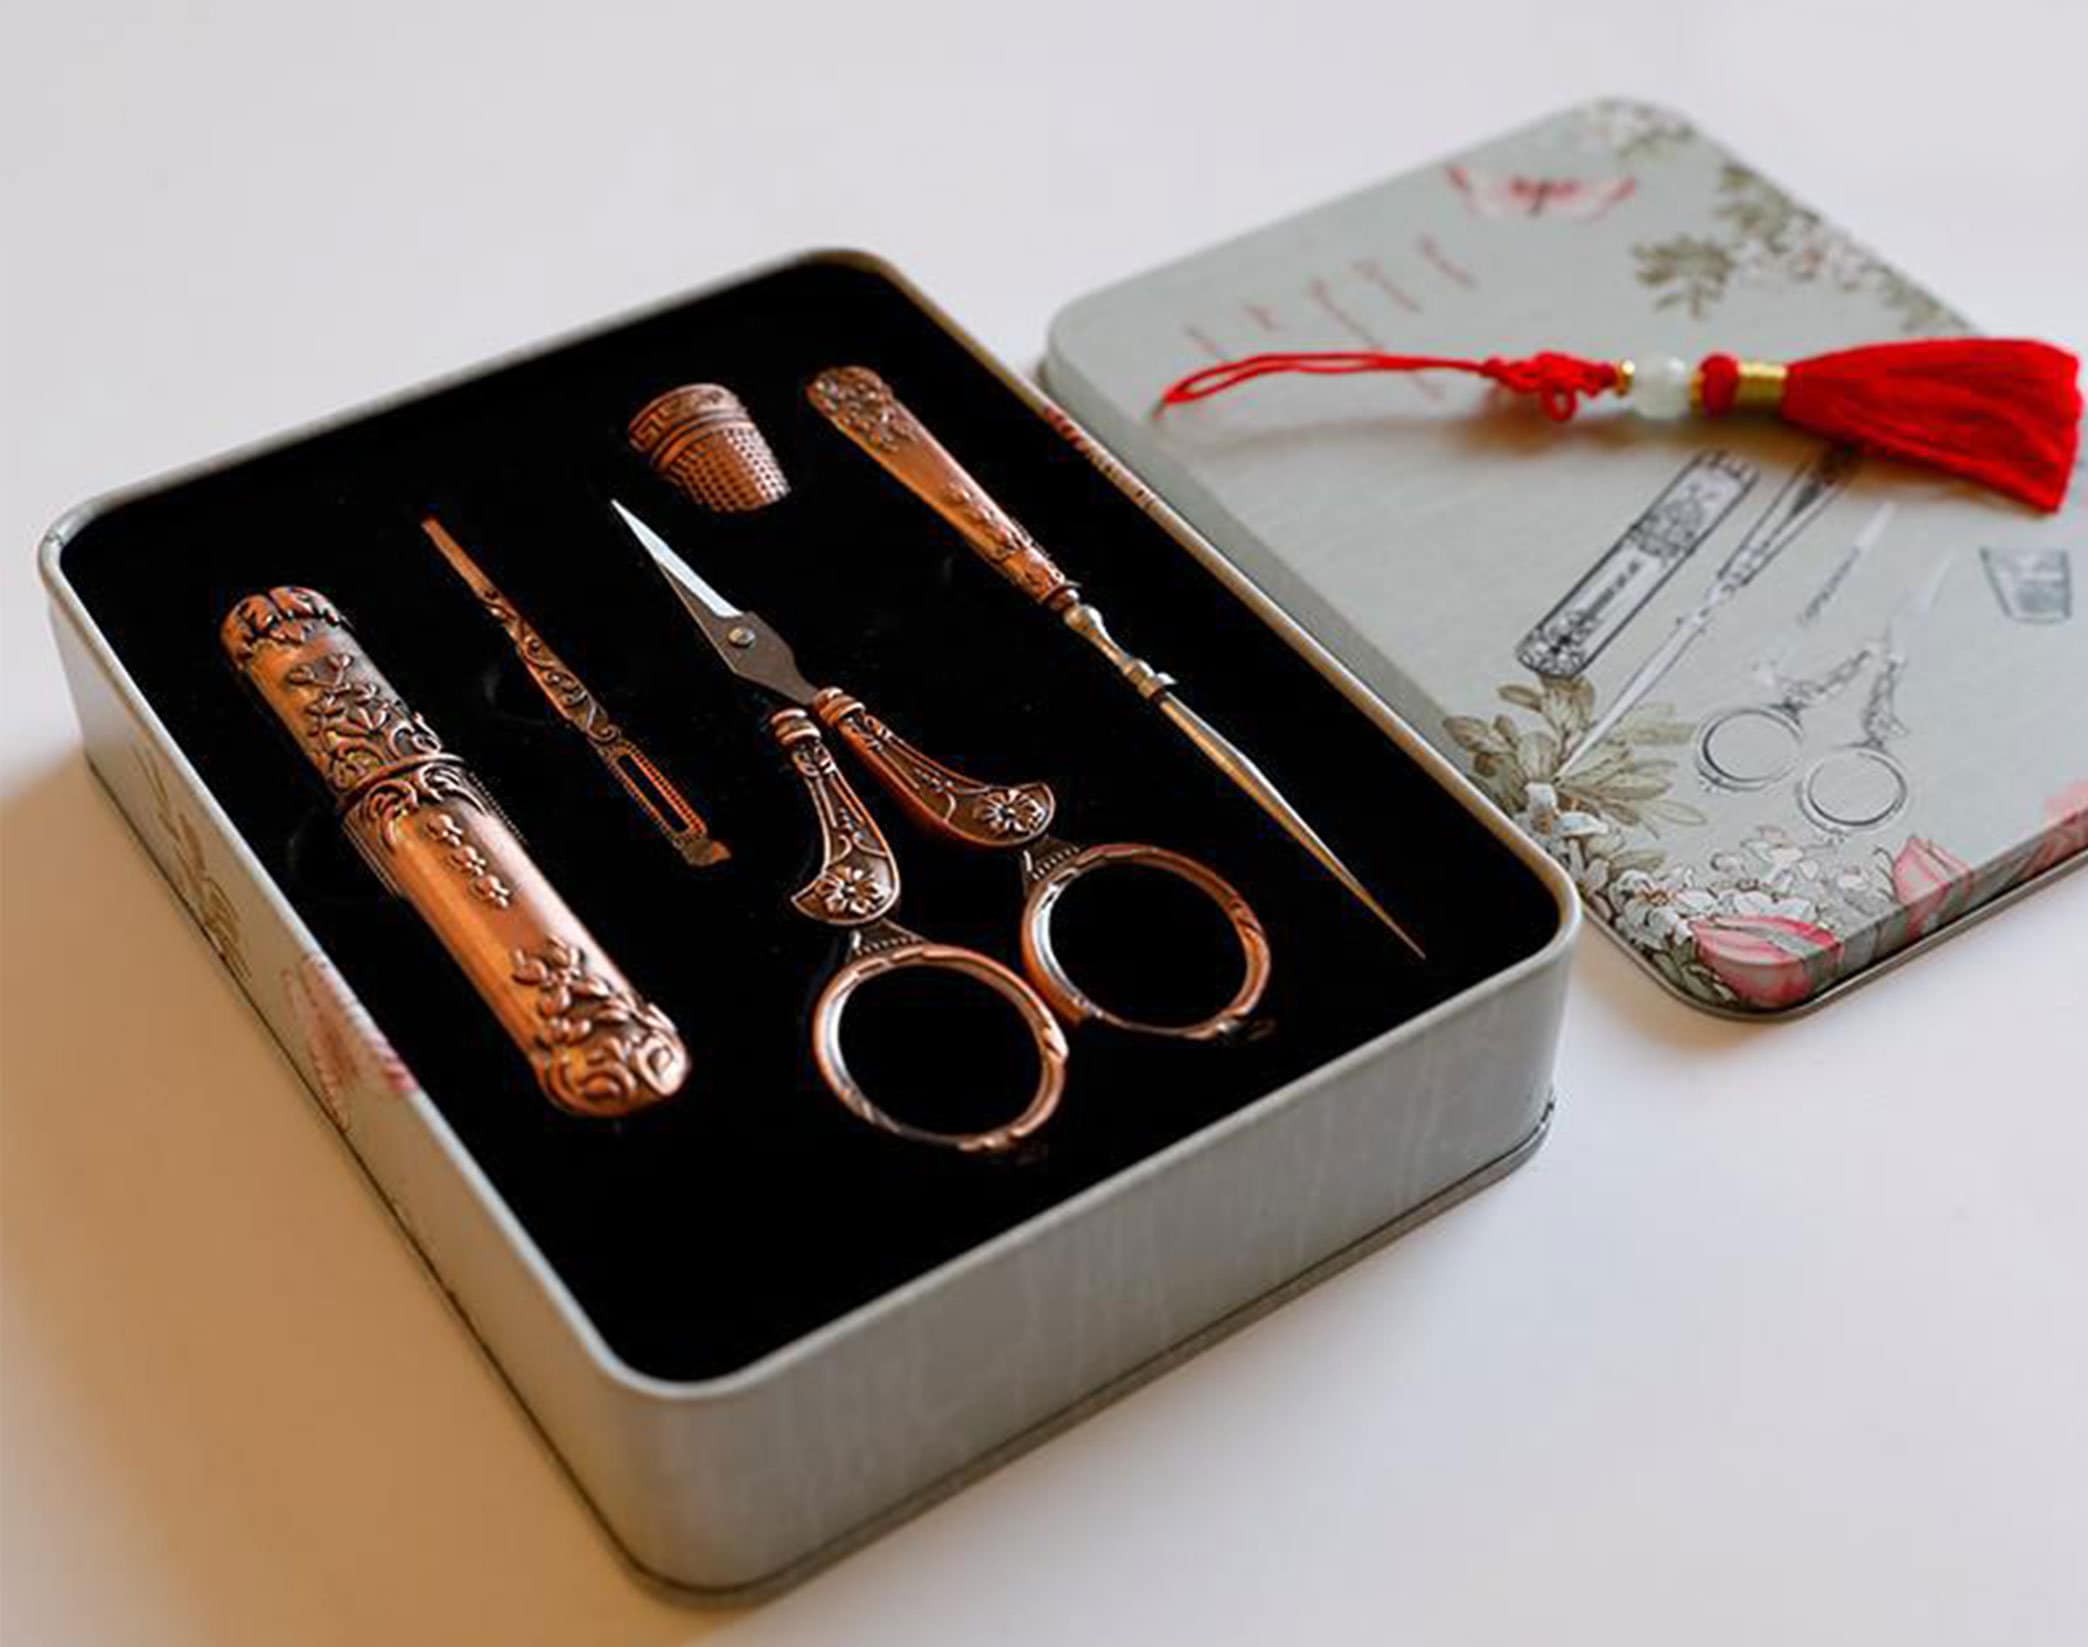 5 PCS Victorian Sewing Tool Set With Scissor Thimble,vintage Needlework  Kit,sewing Case,antique Embroidery Scissor,gift for Sewing Lovers 